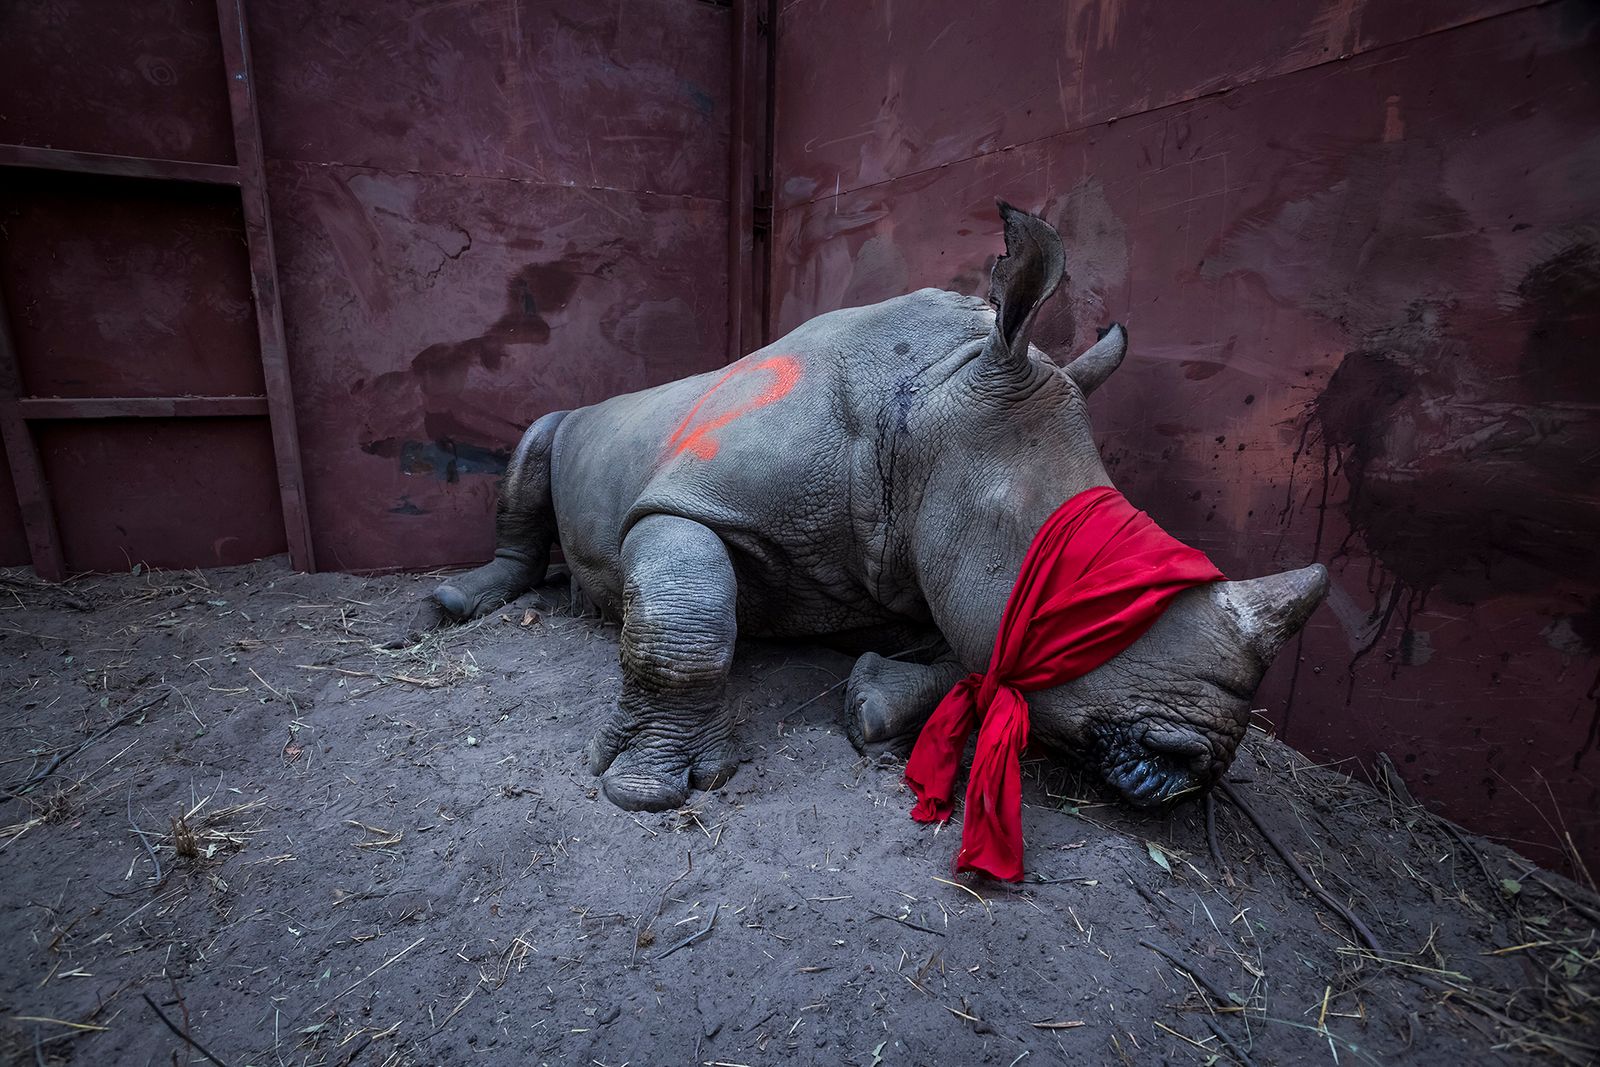 © Neil Aldridge - Image from the The Return of the Rhino photography project